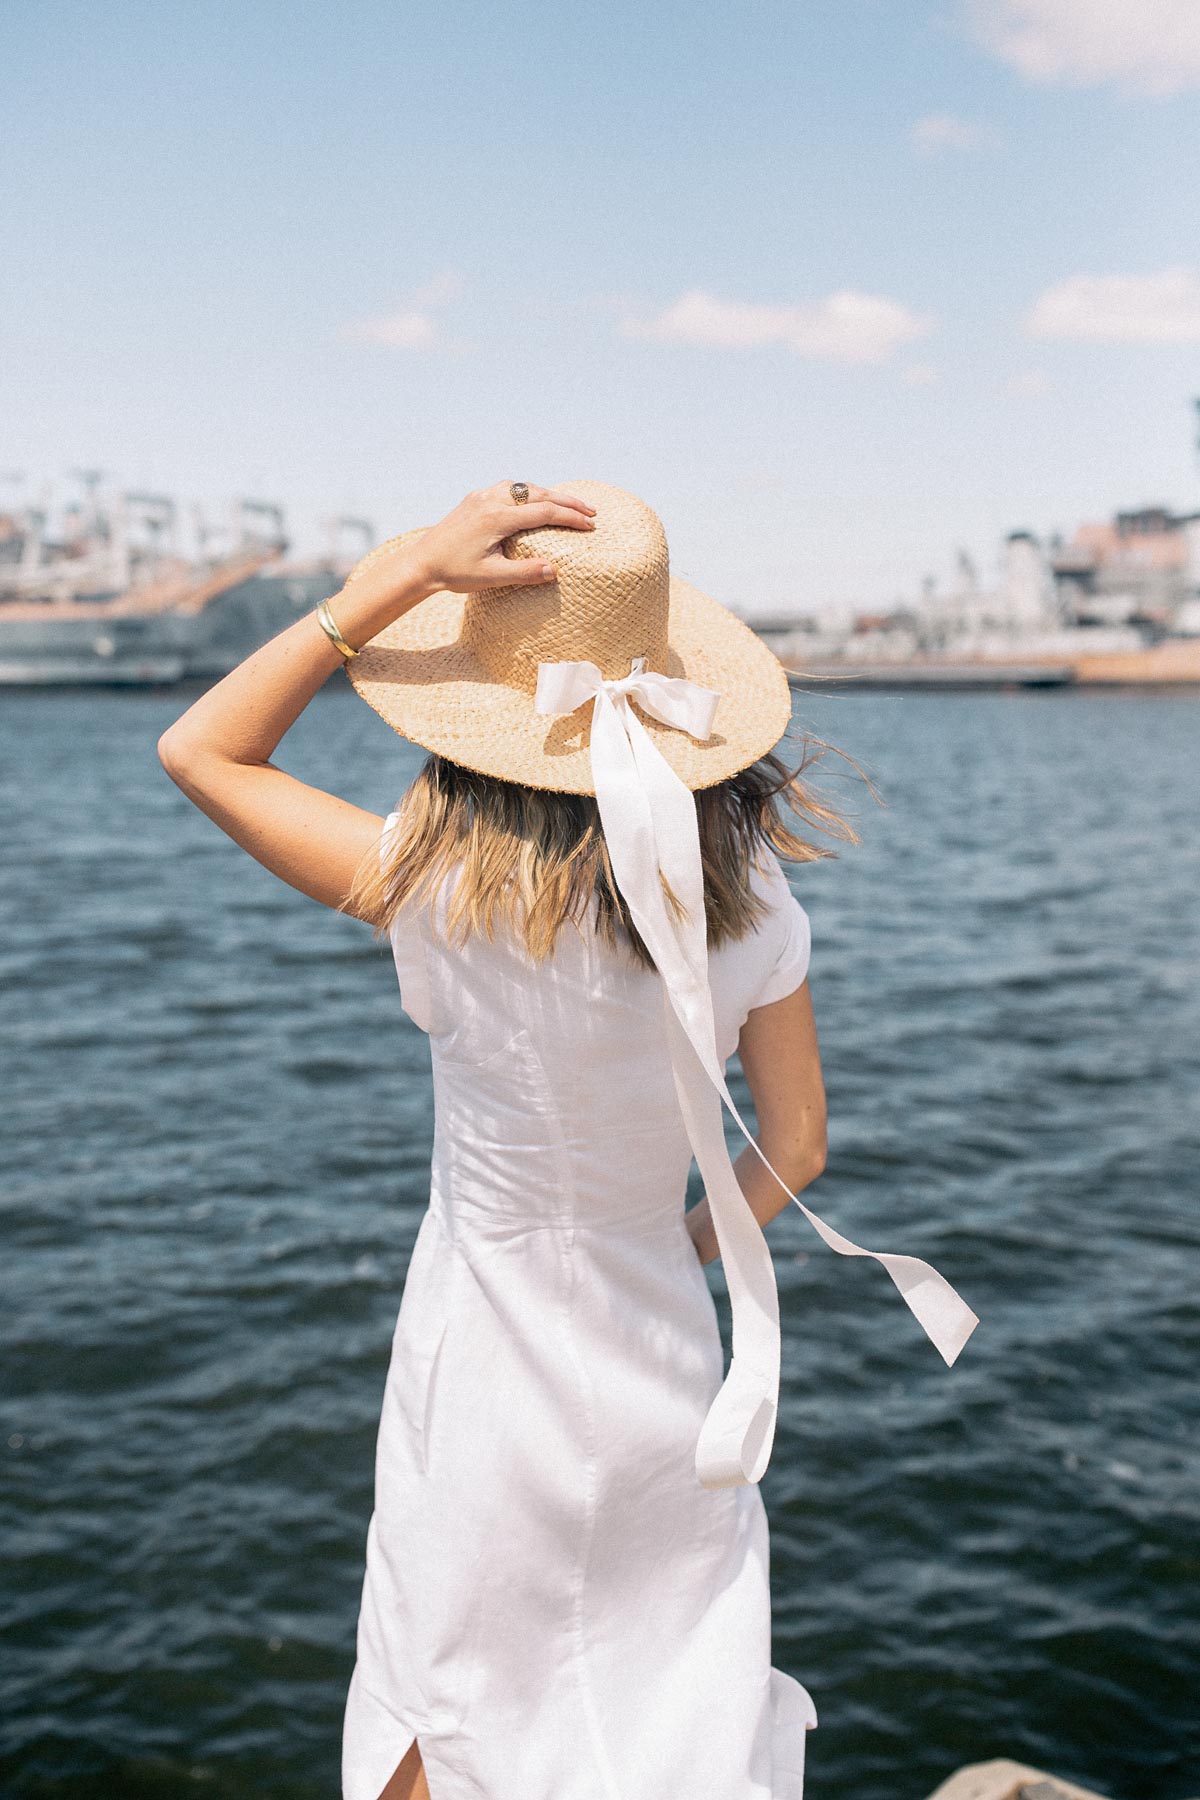 Jess Ann Kirby spends 48 hours in Philadelphia in a straw hat and white dress from Anthropologie.